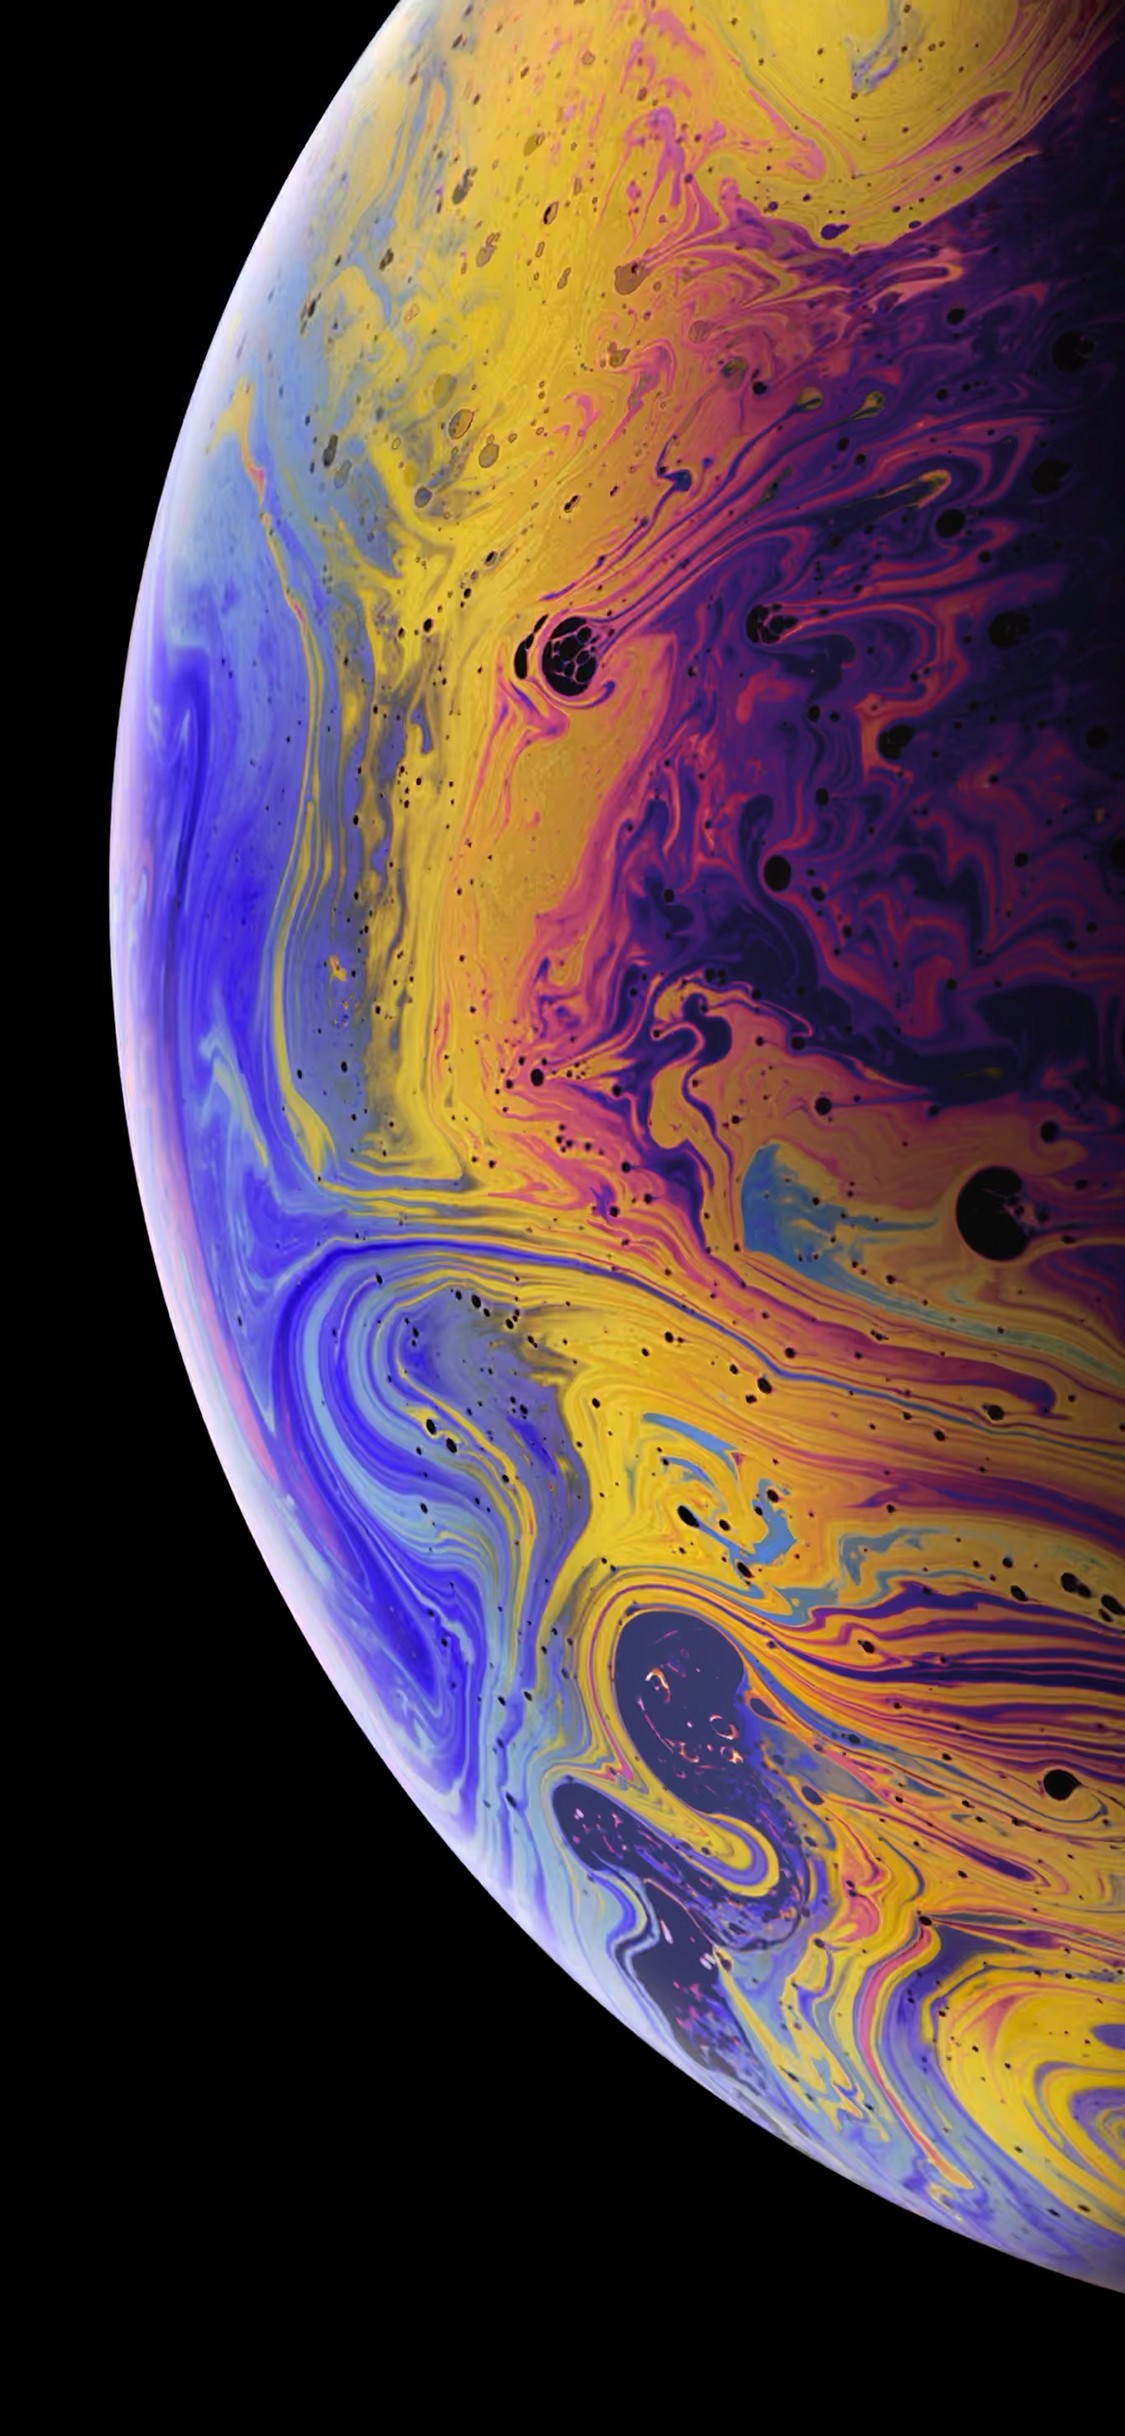 iPhone XS Home Screen Wallpaper With high-resolution 1125X2436 pixel. You can set as wallpaper for Apple iPhone X, XS Max, XR, 8, 7, 6, SE, iPad. Enjoy and share your favorite HD wallpapers and background images